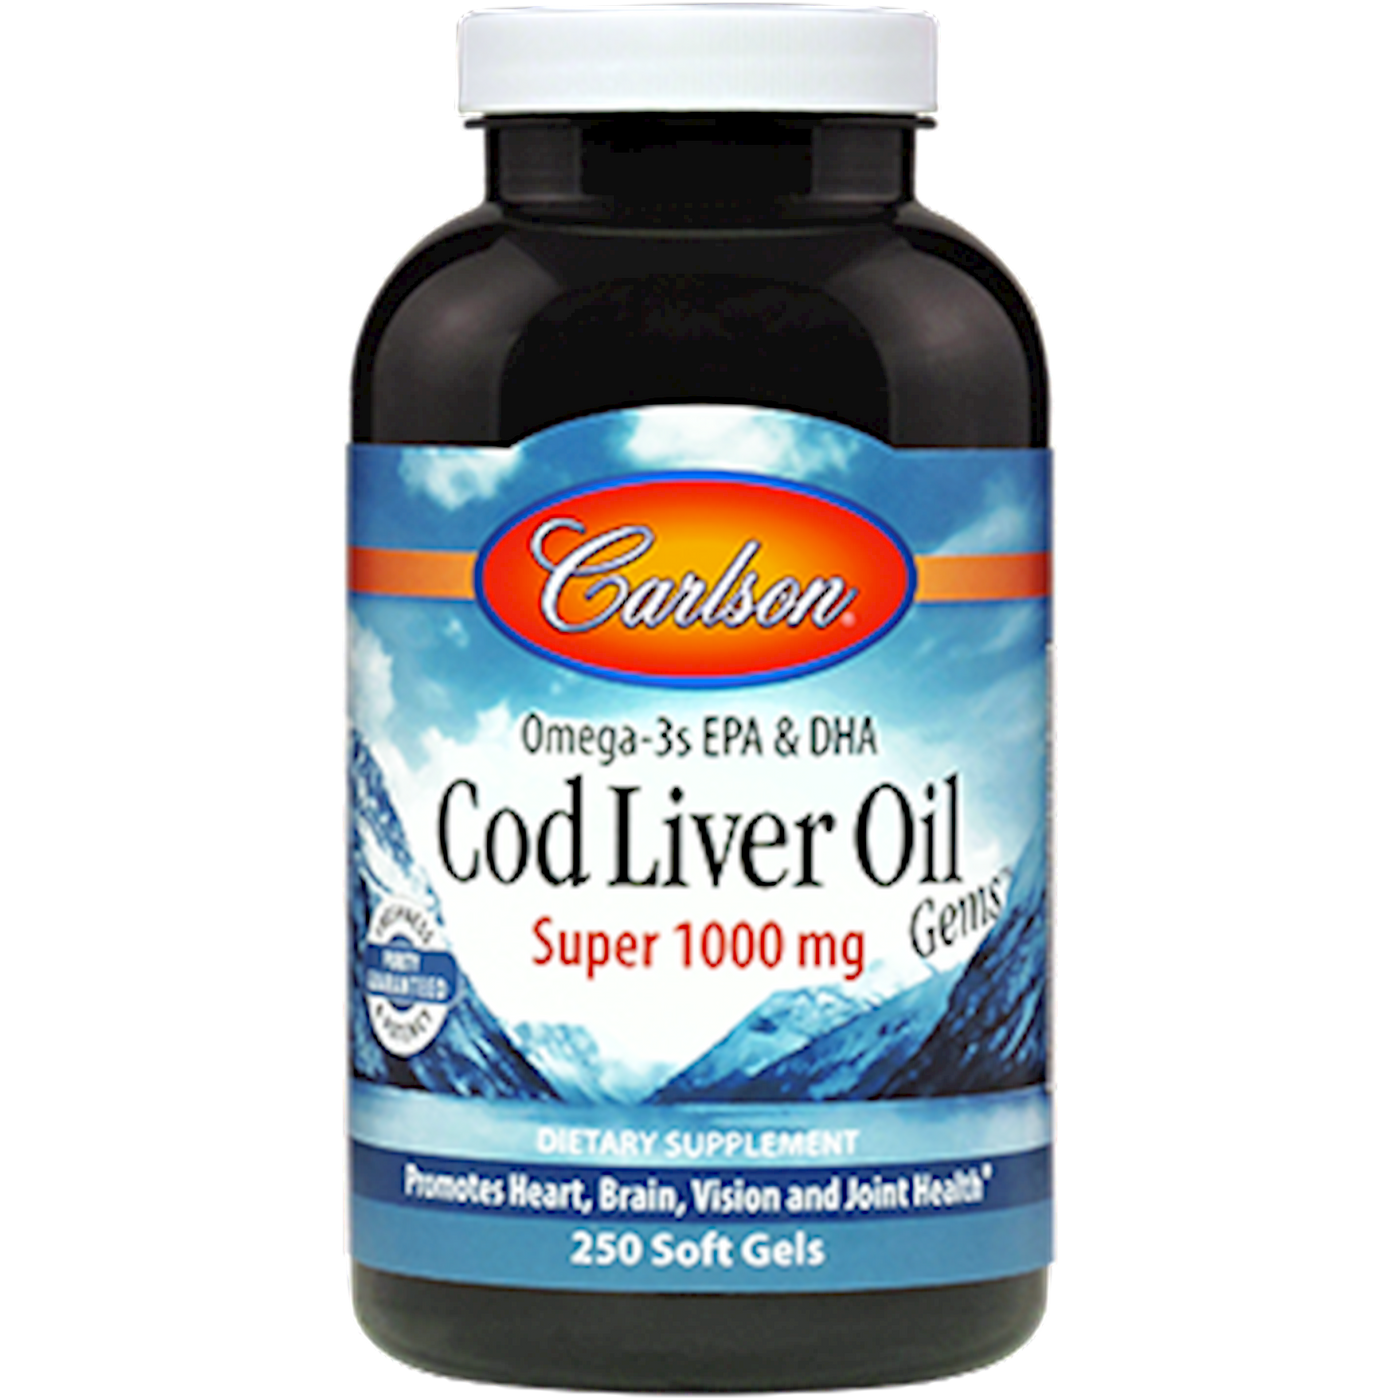 Super Cod Liver Oil 1000 mg 250 gels Curated Wellness